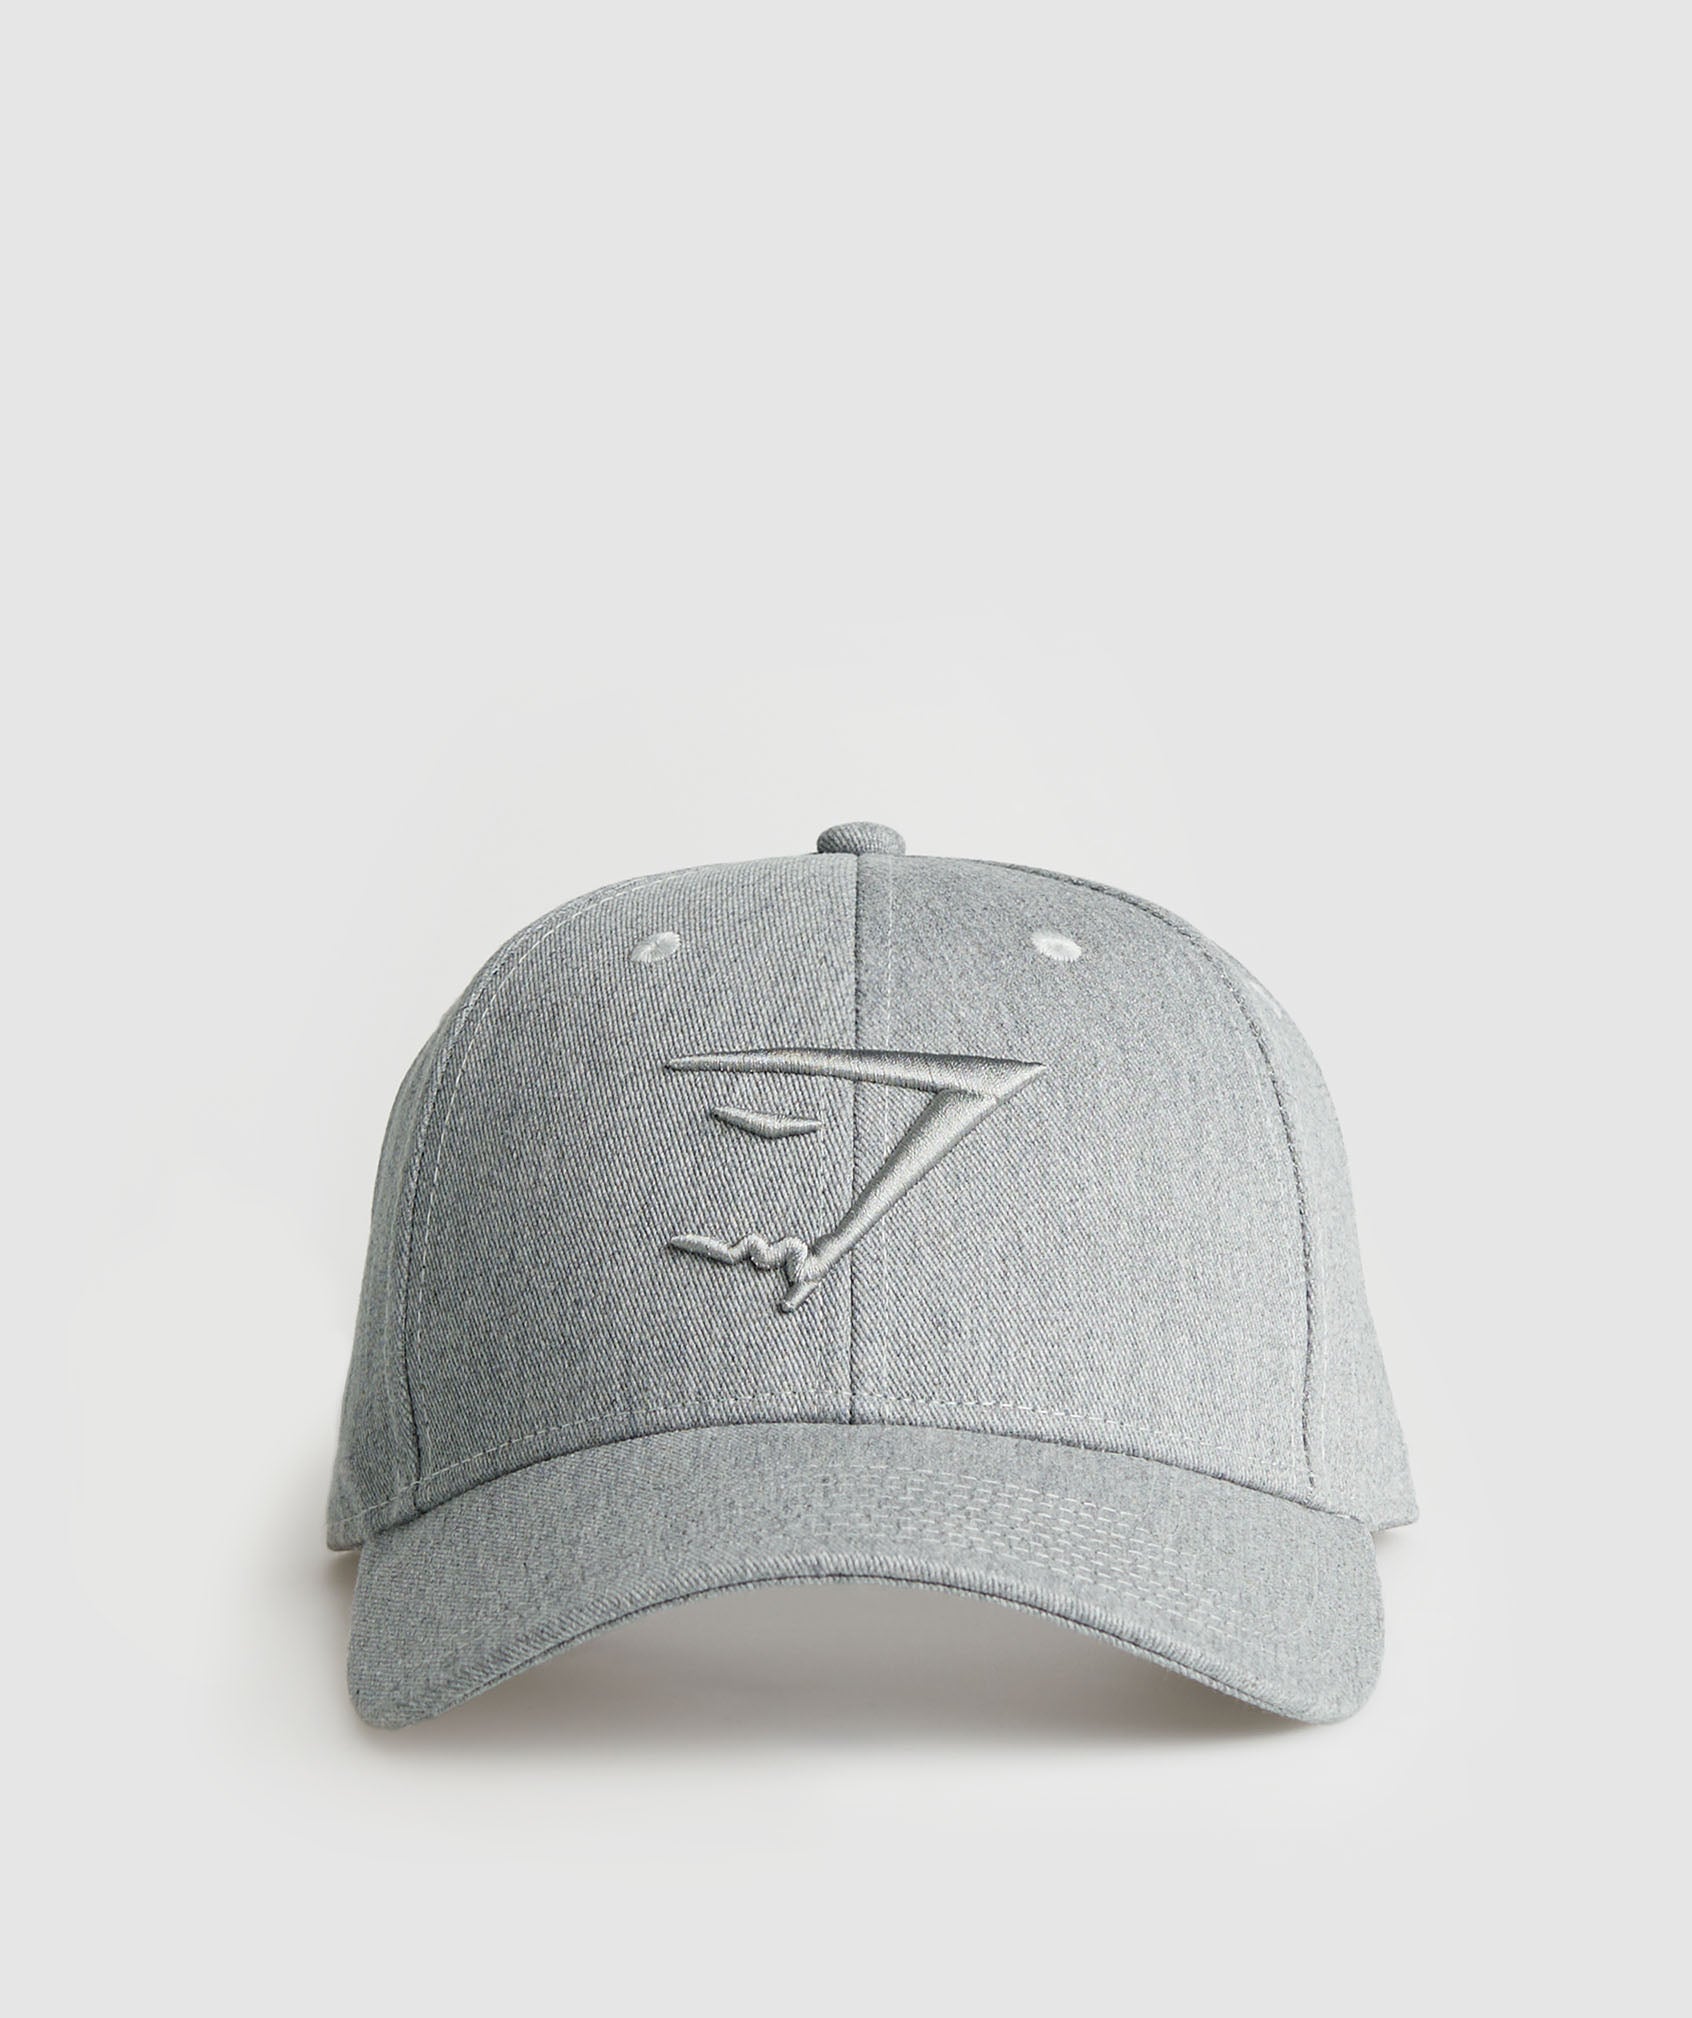 Sharkhead Cap in {{variantColor} is out of stock